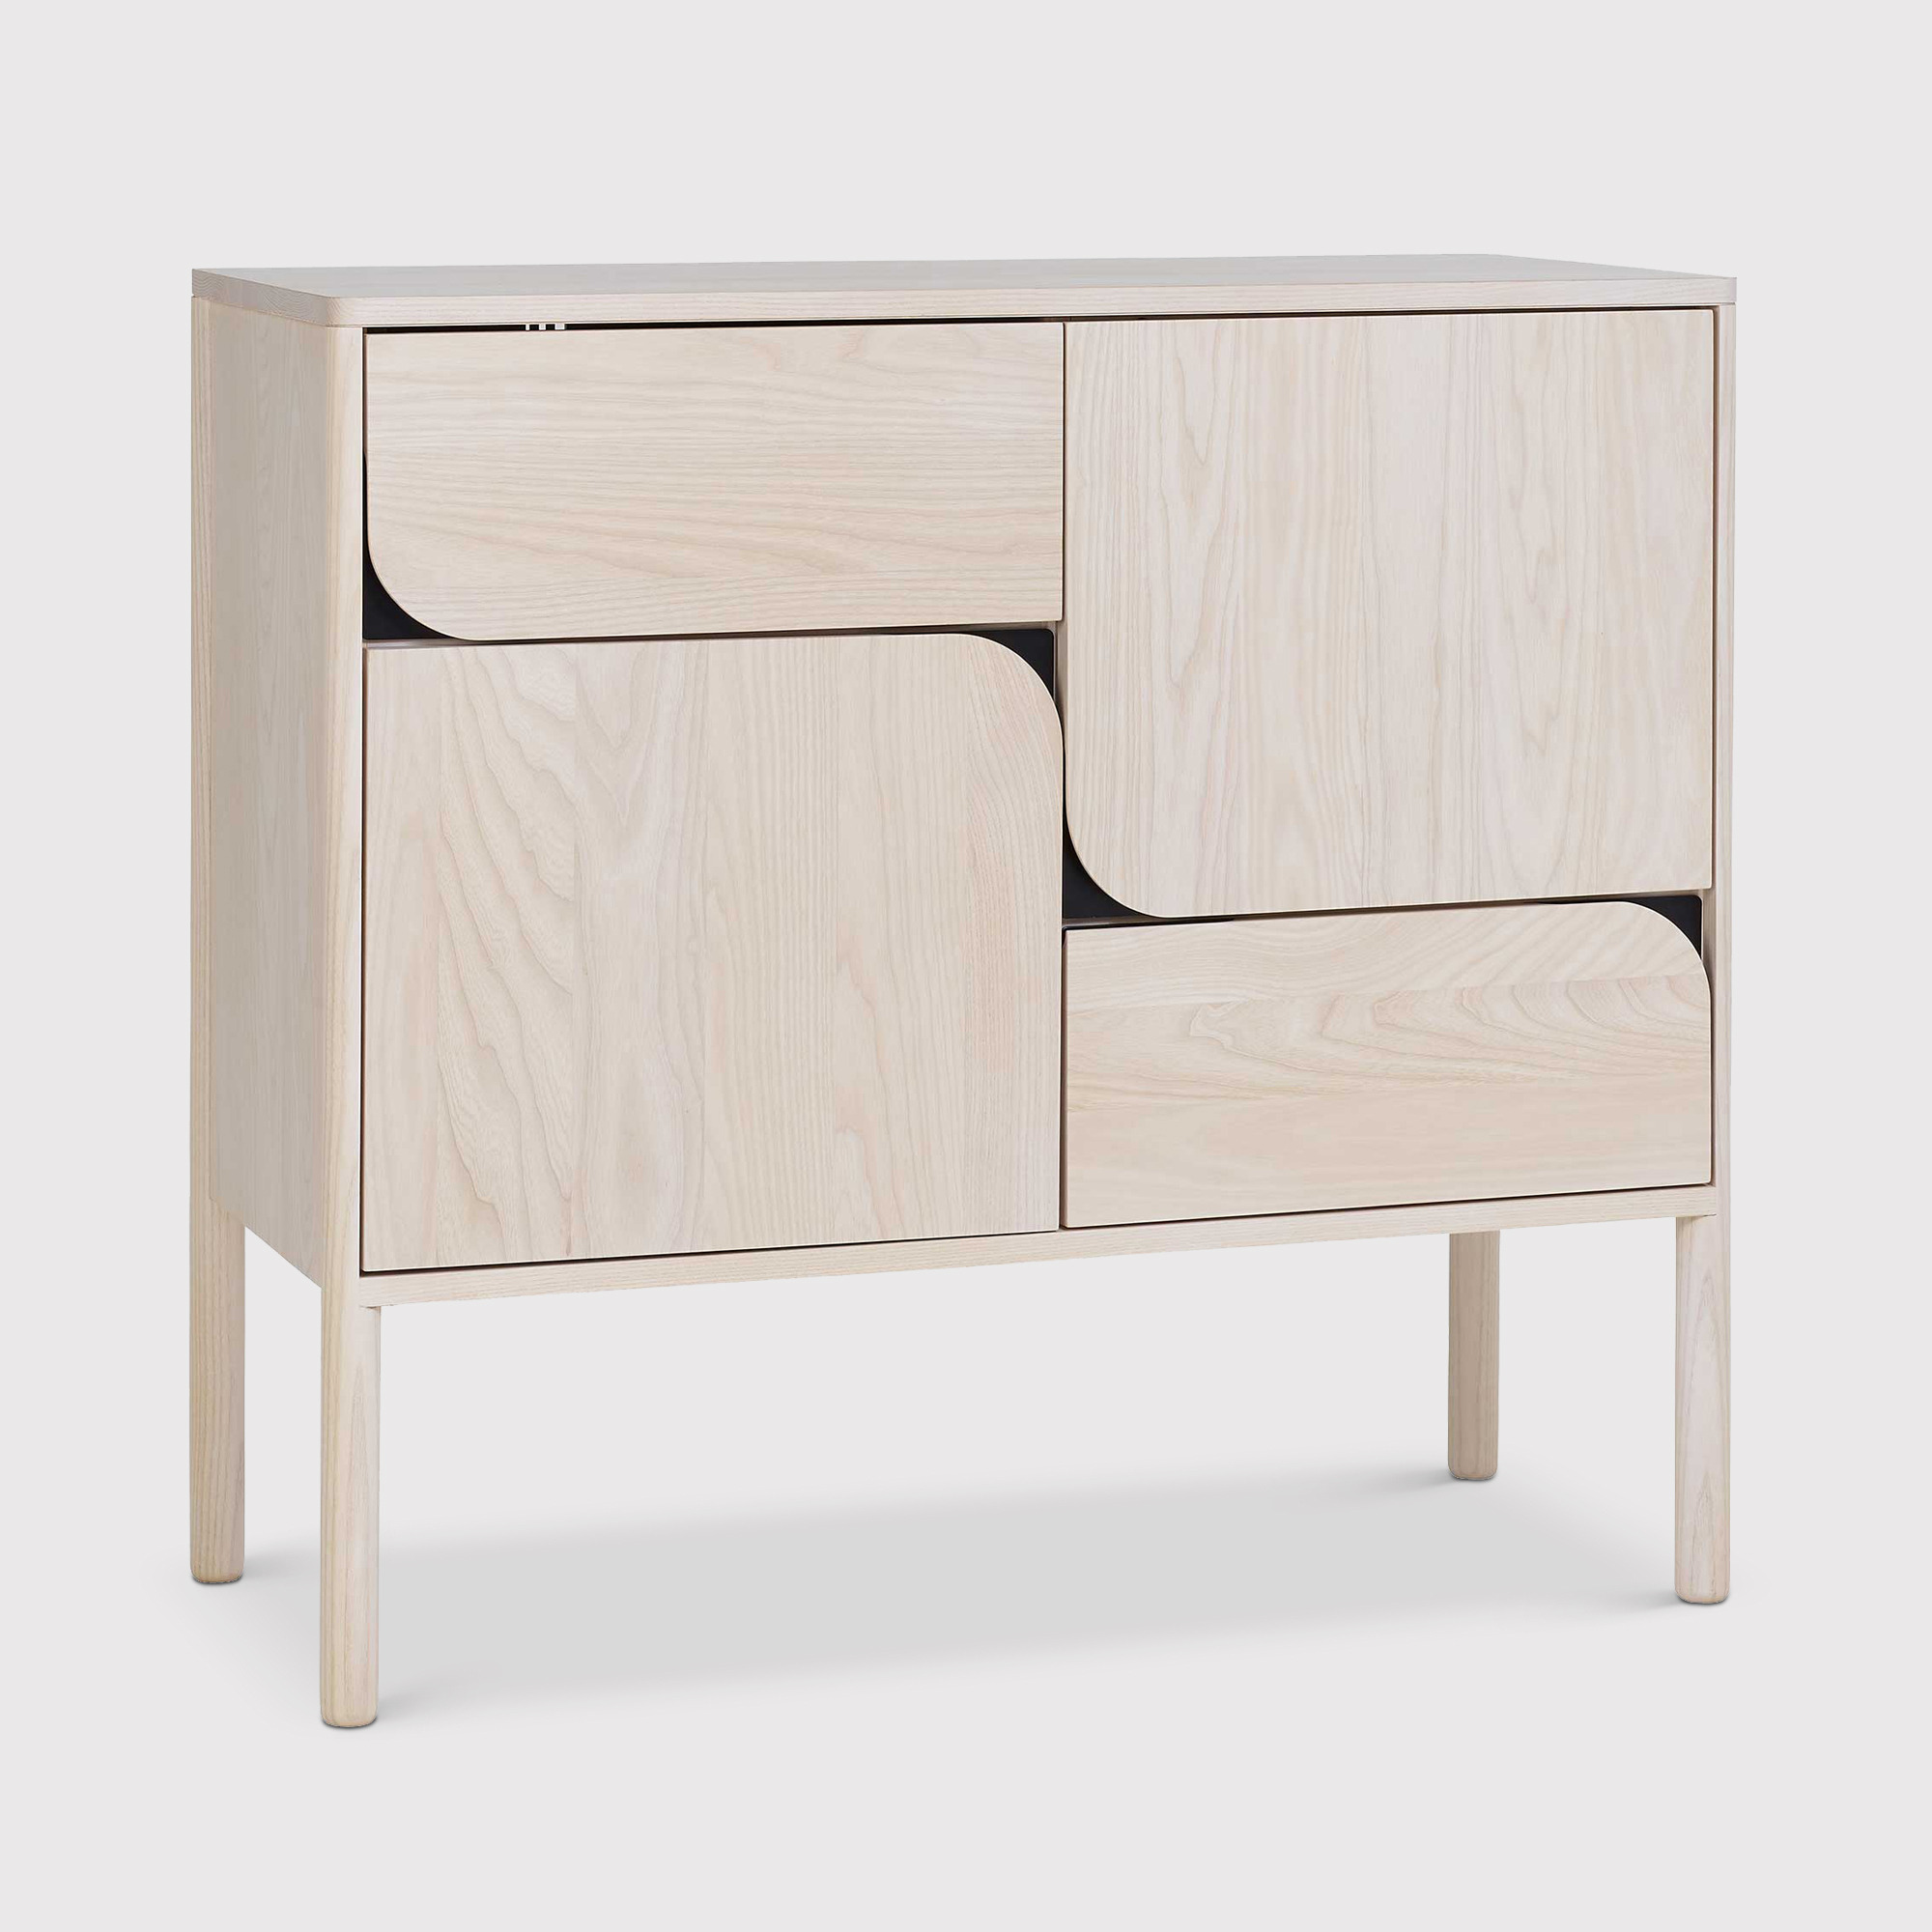 Ercol Verso High Sideboard, Neutral Wood - Barker & Stonehouse - image 1